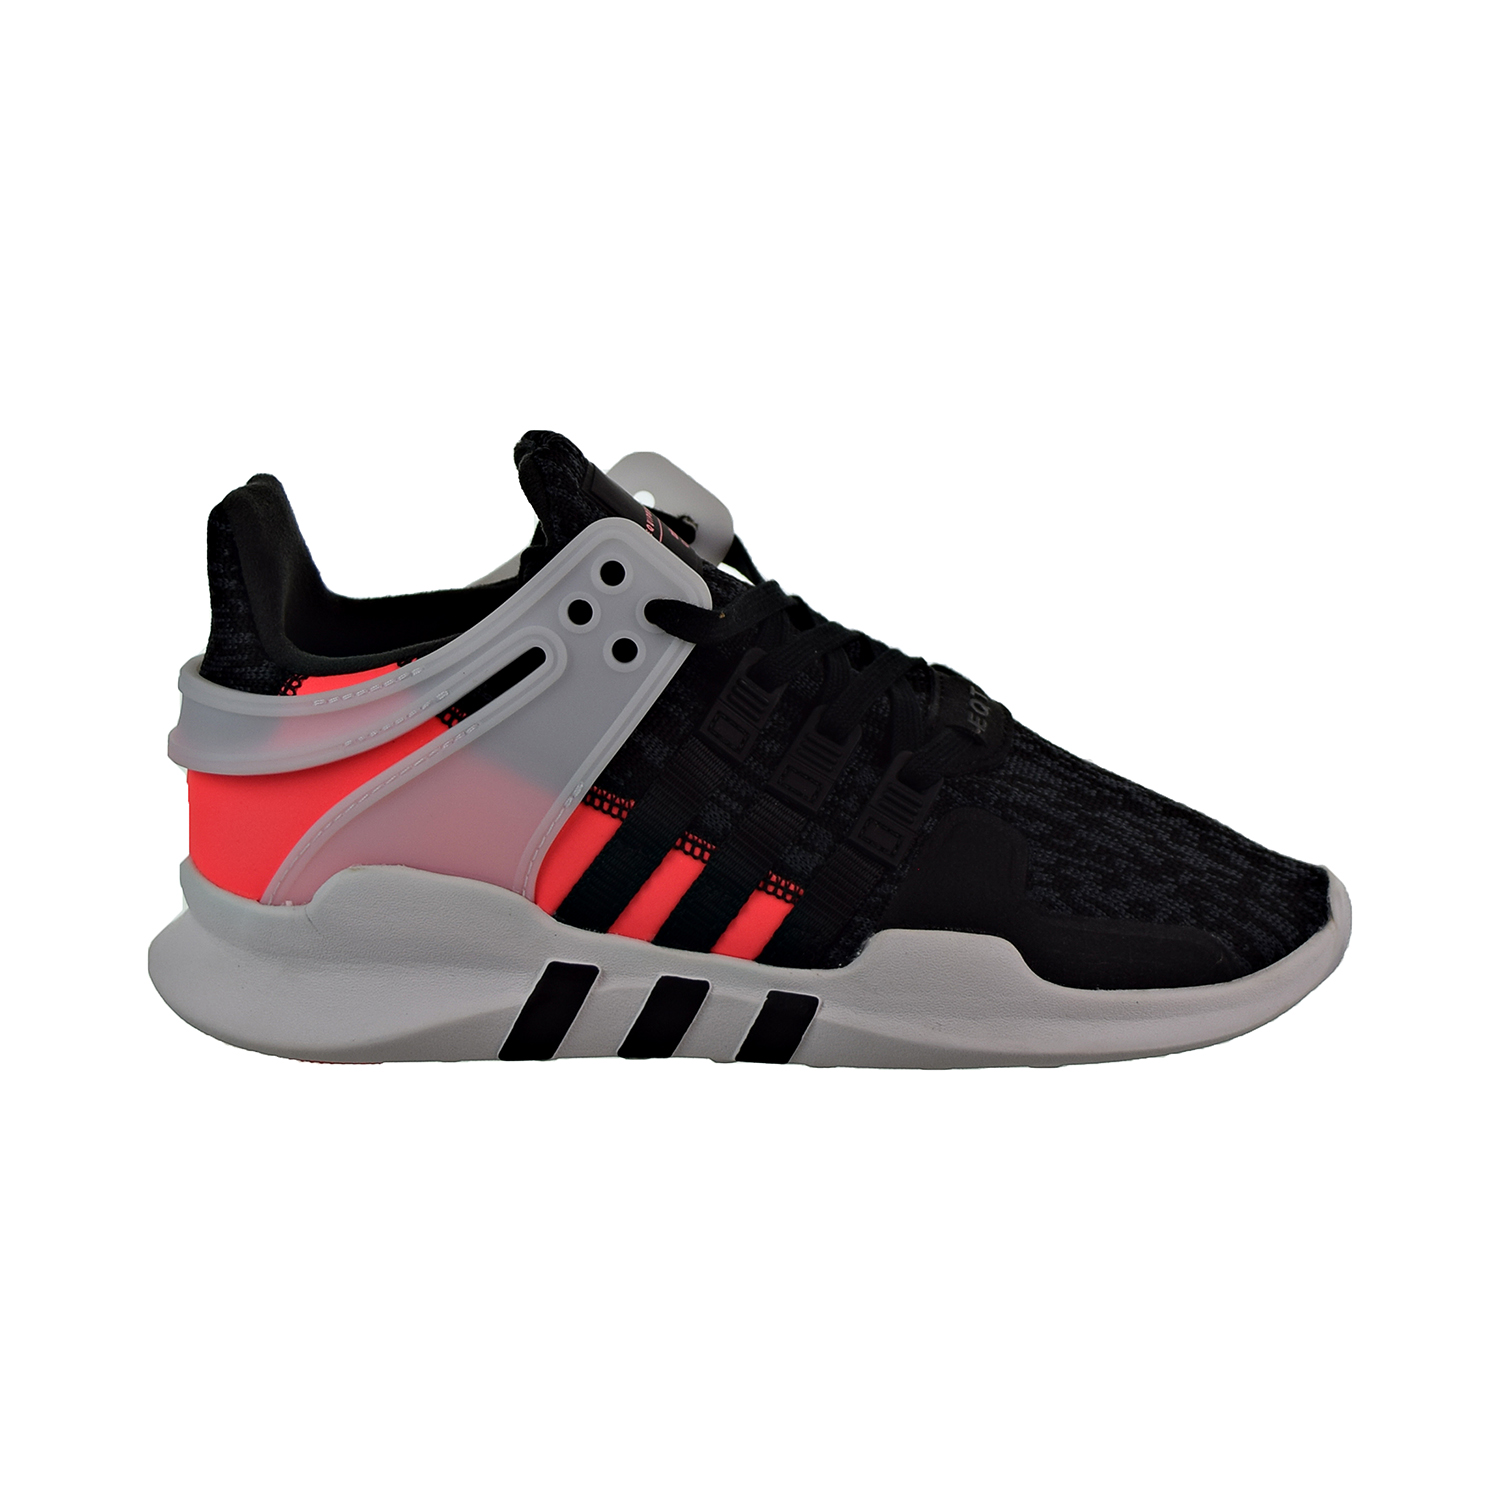 adidas eqt support adv black and red